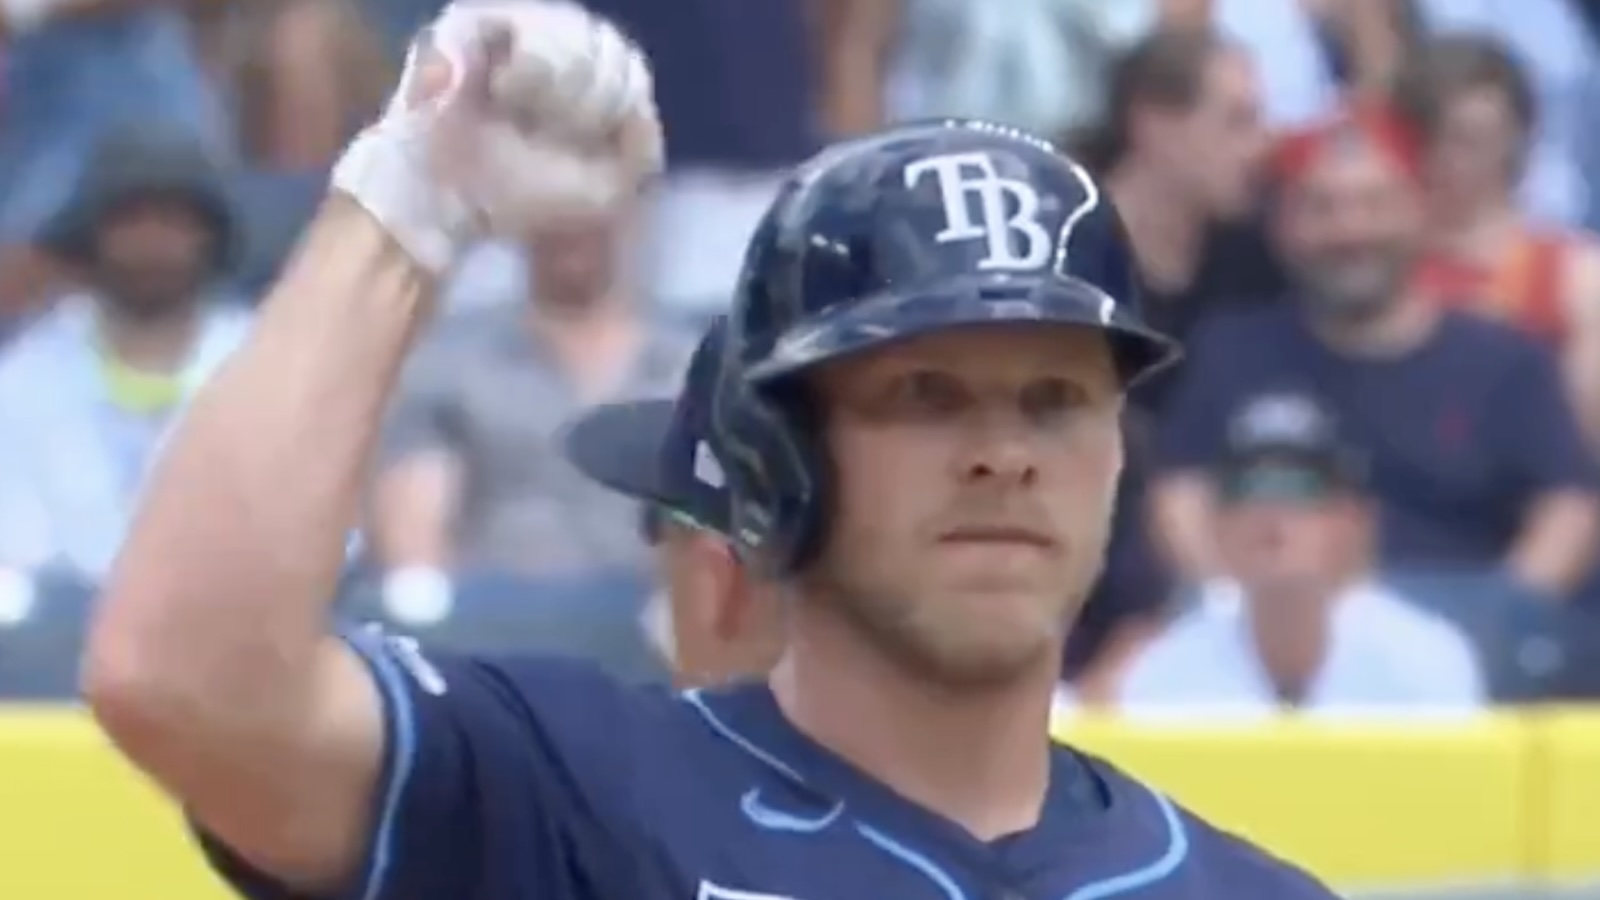 Rays player celebrated after double inspired by Trump